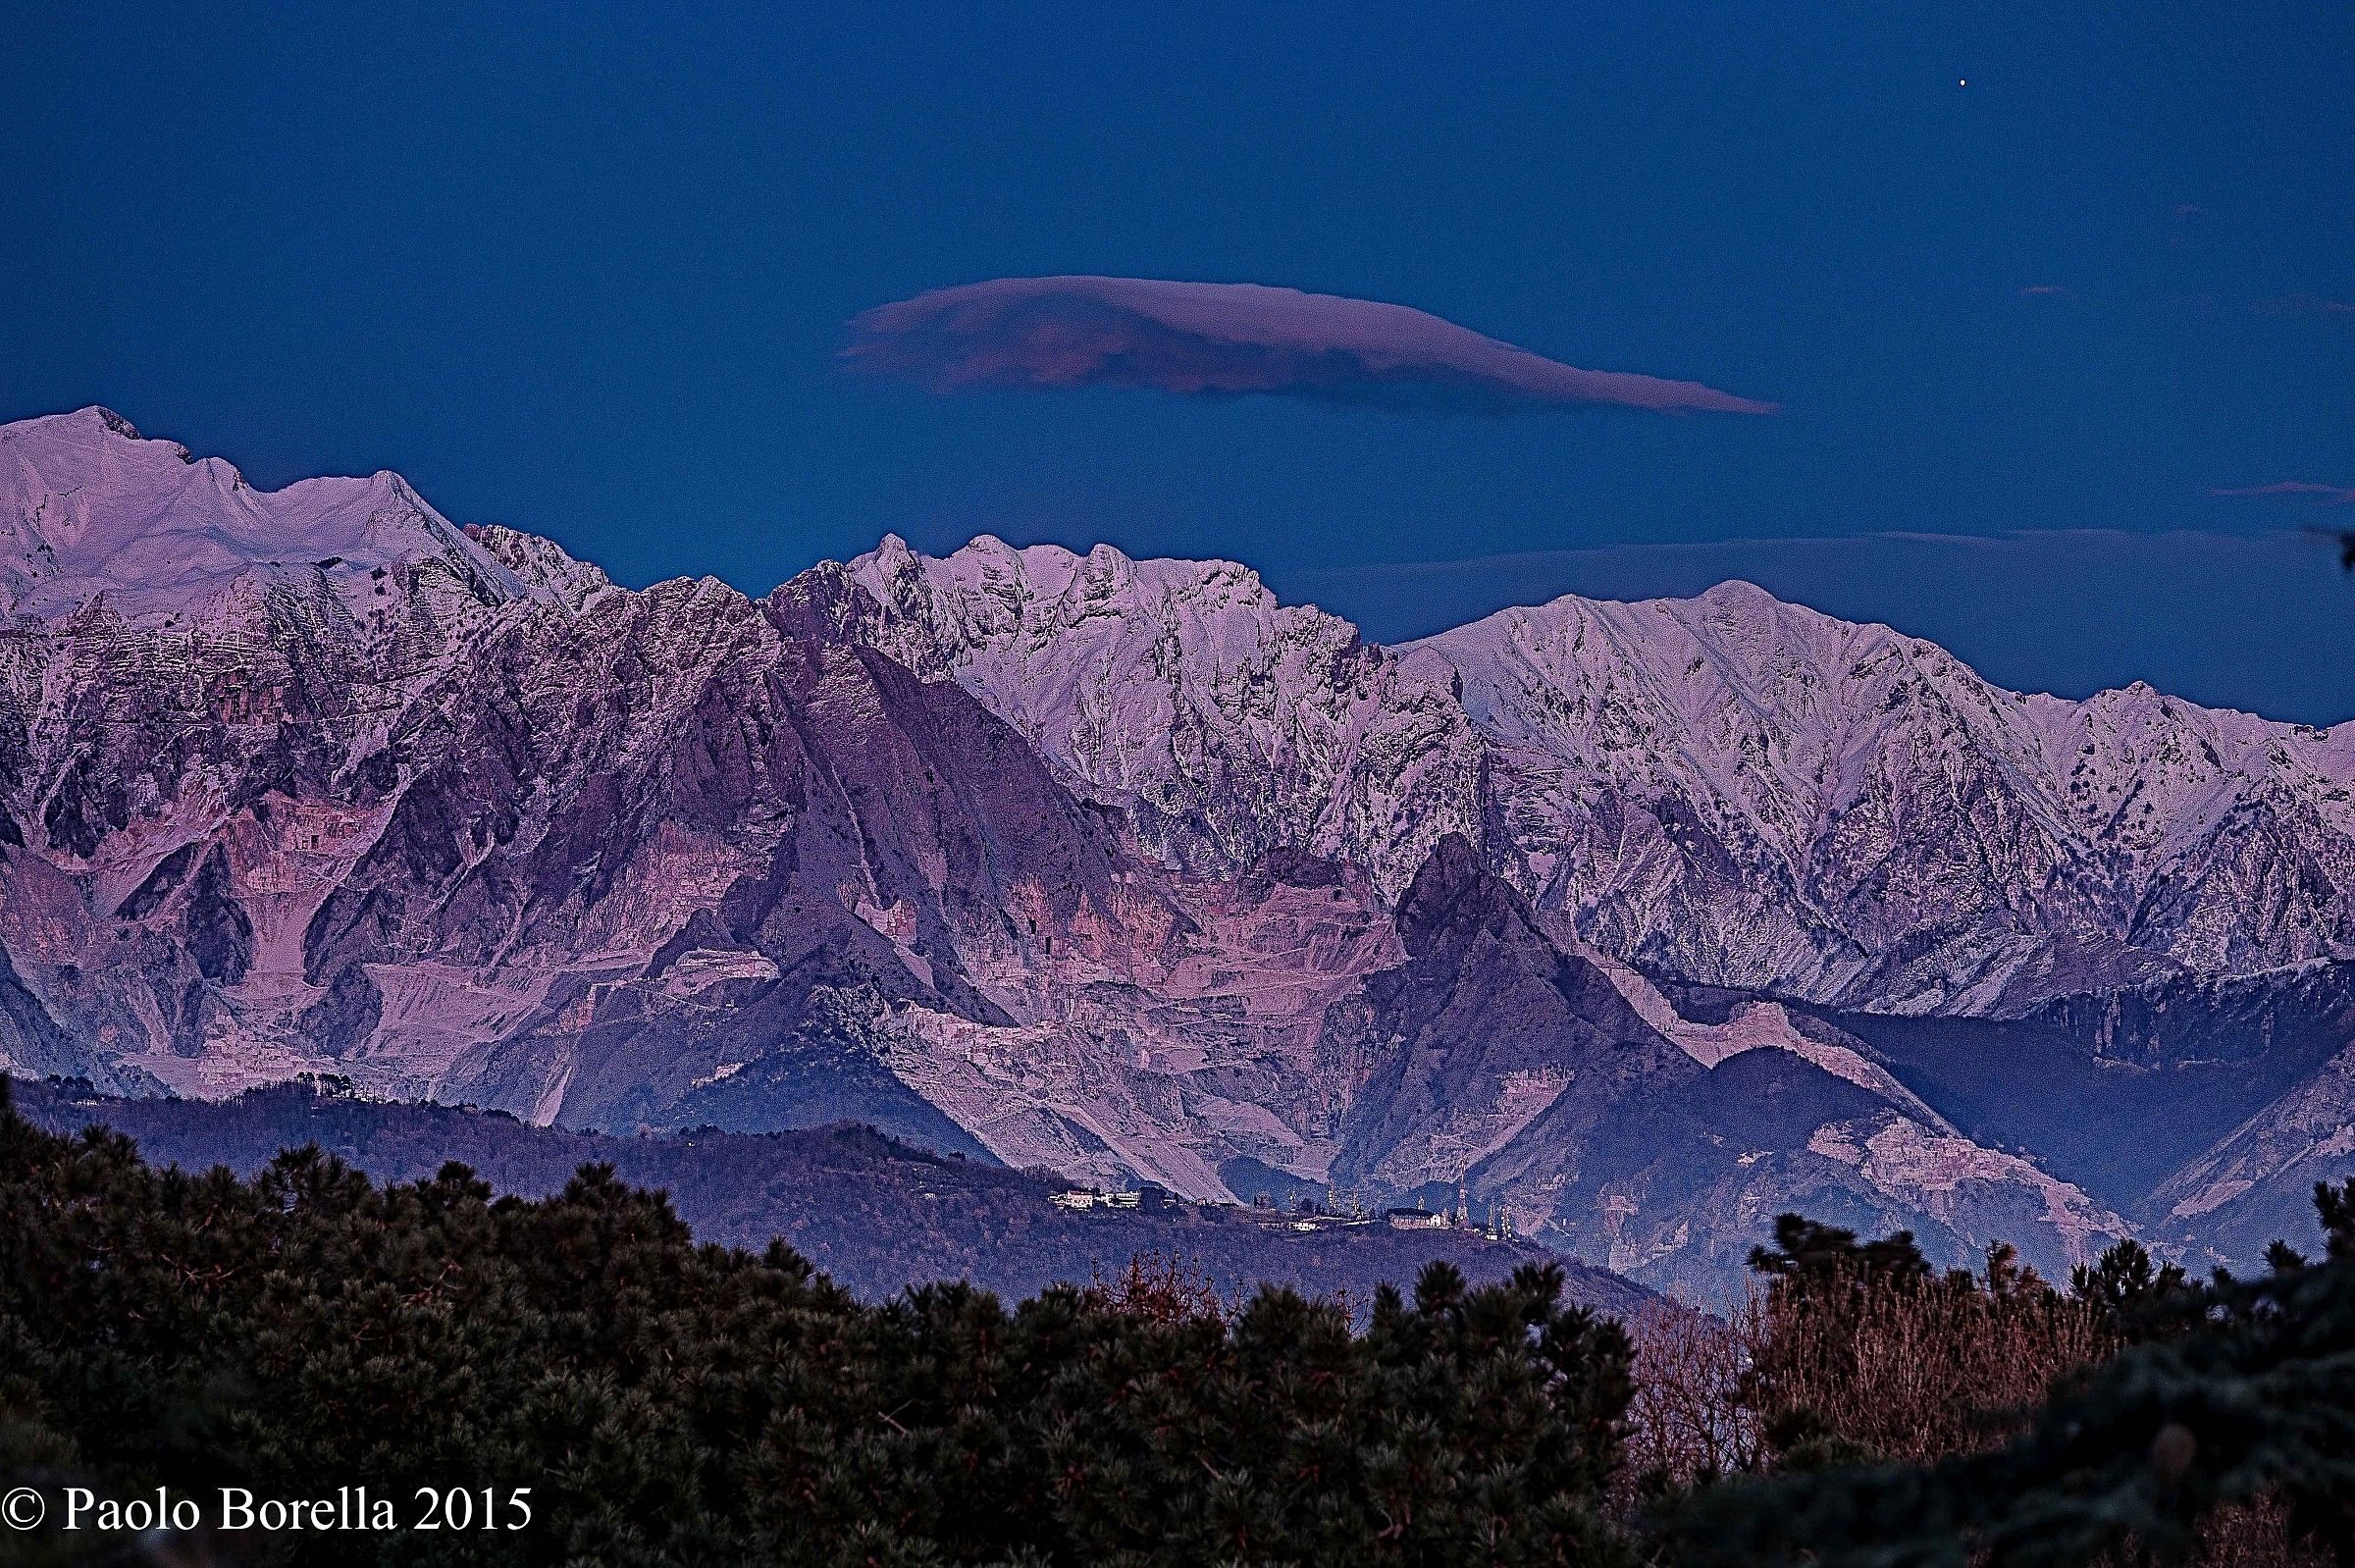 The Apuan Alps and Venus...